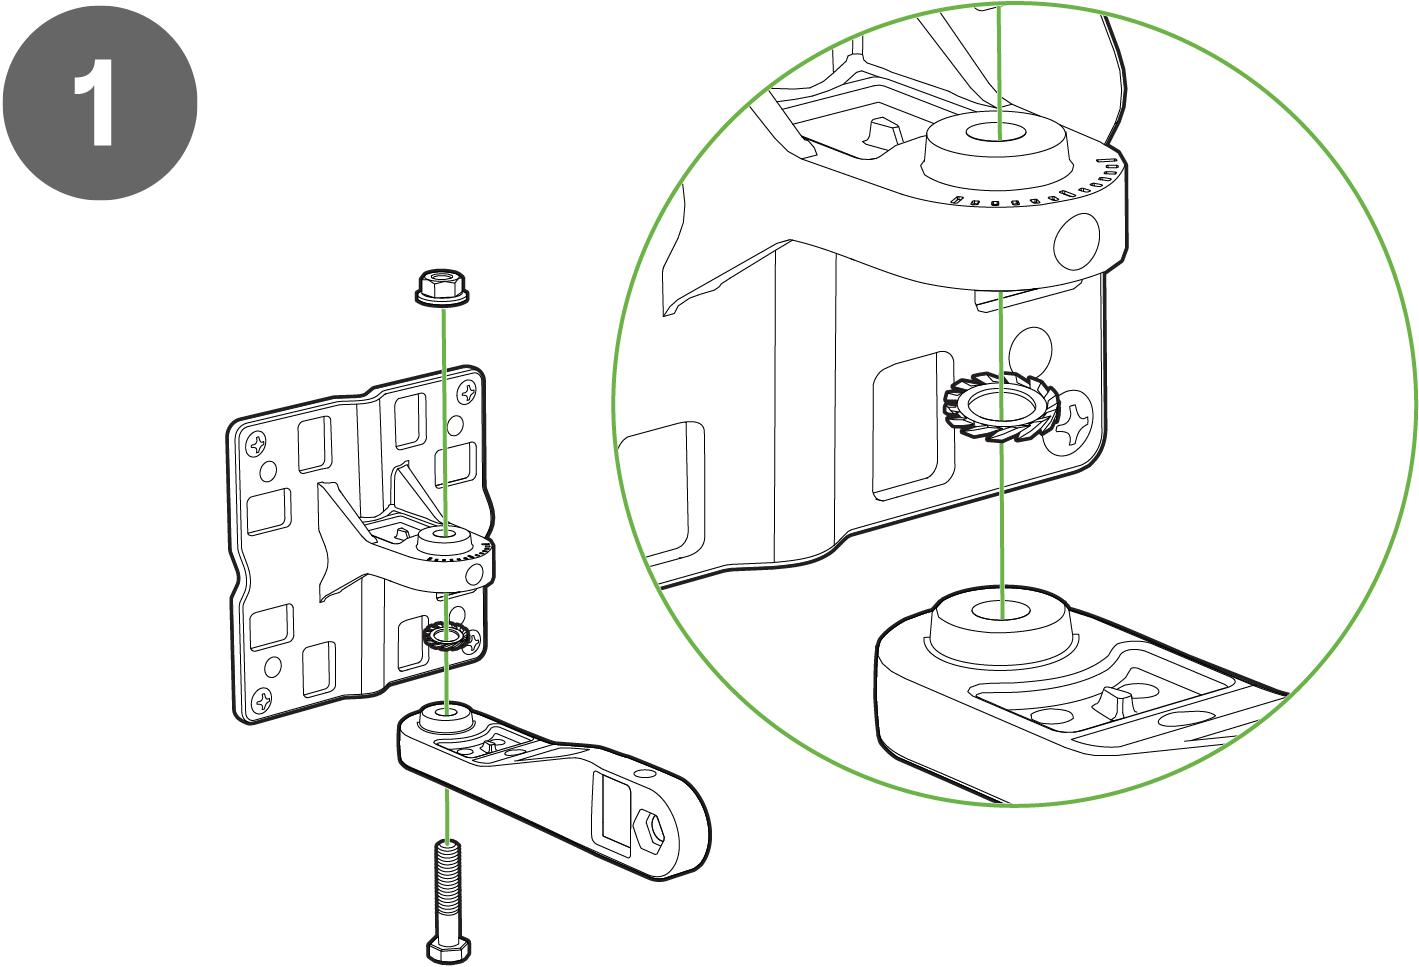 Image showing how to connect the mount arm and the wall mounting flange